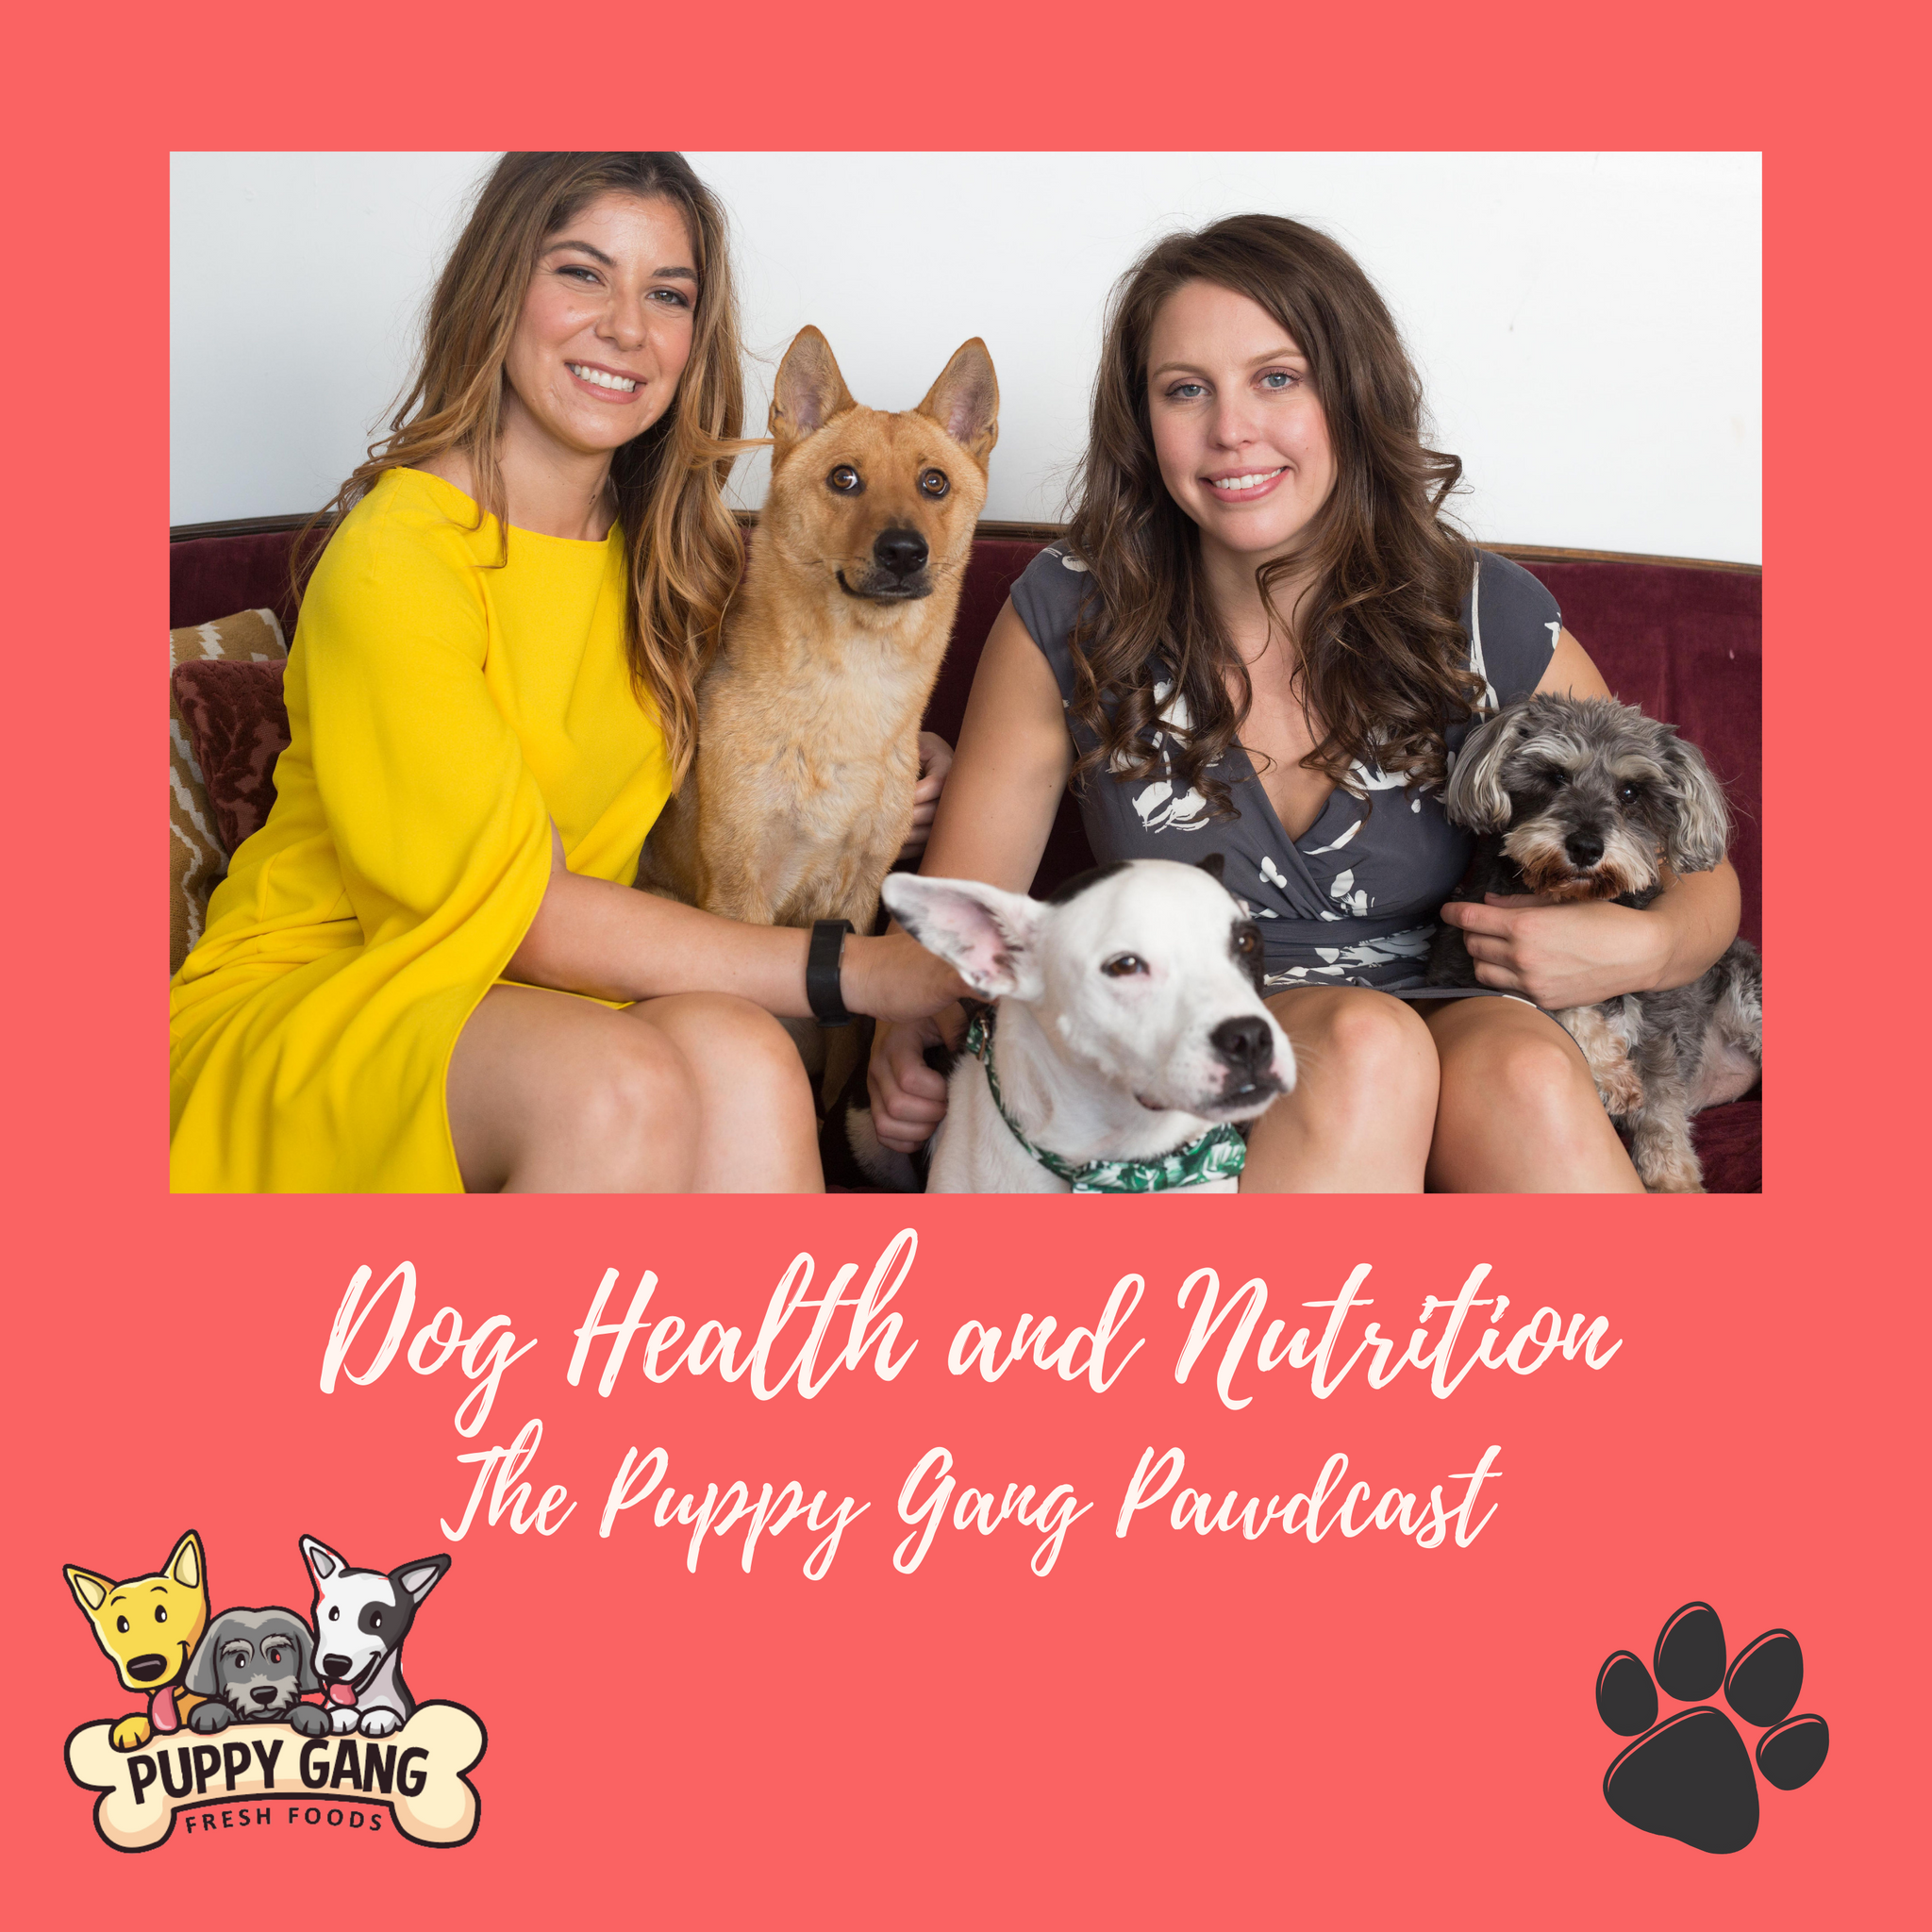 Dog Health and Nutrition: The Puppy Gang Pawdcast-Episode 2-Whole Nutrition for Dogs